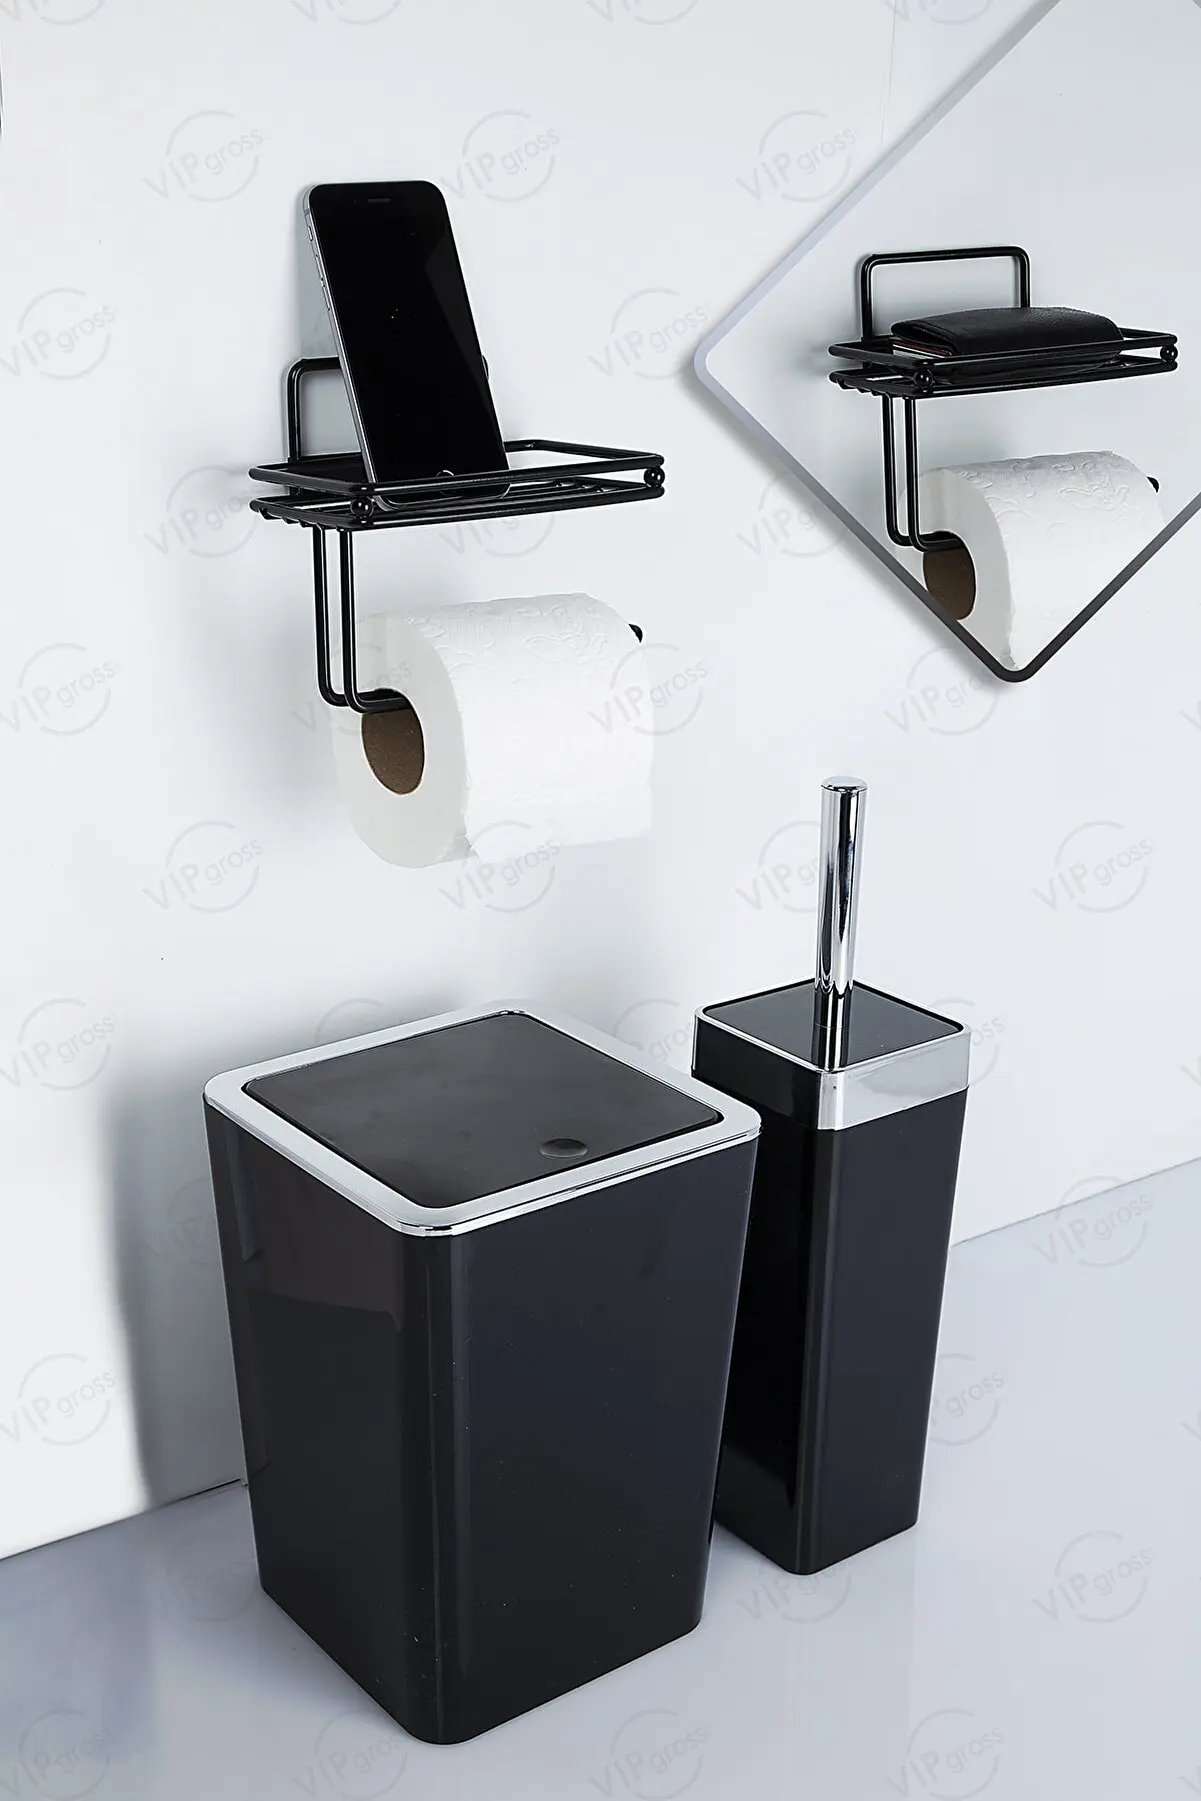 1pc Black Free Standing Toilet Paper Holder With Tray, Floor